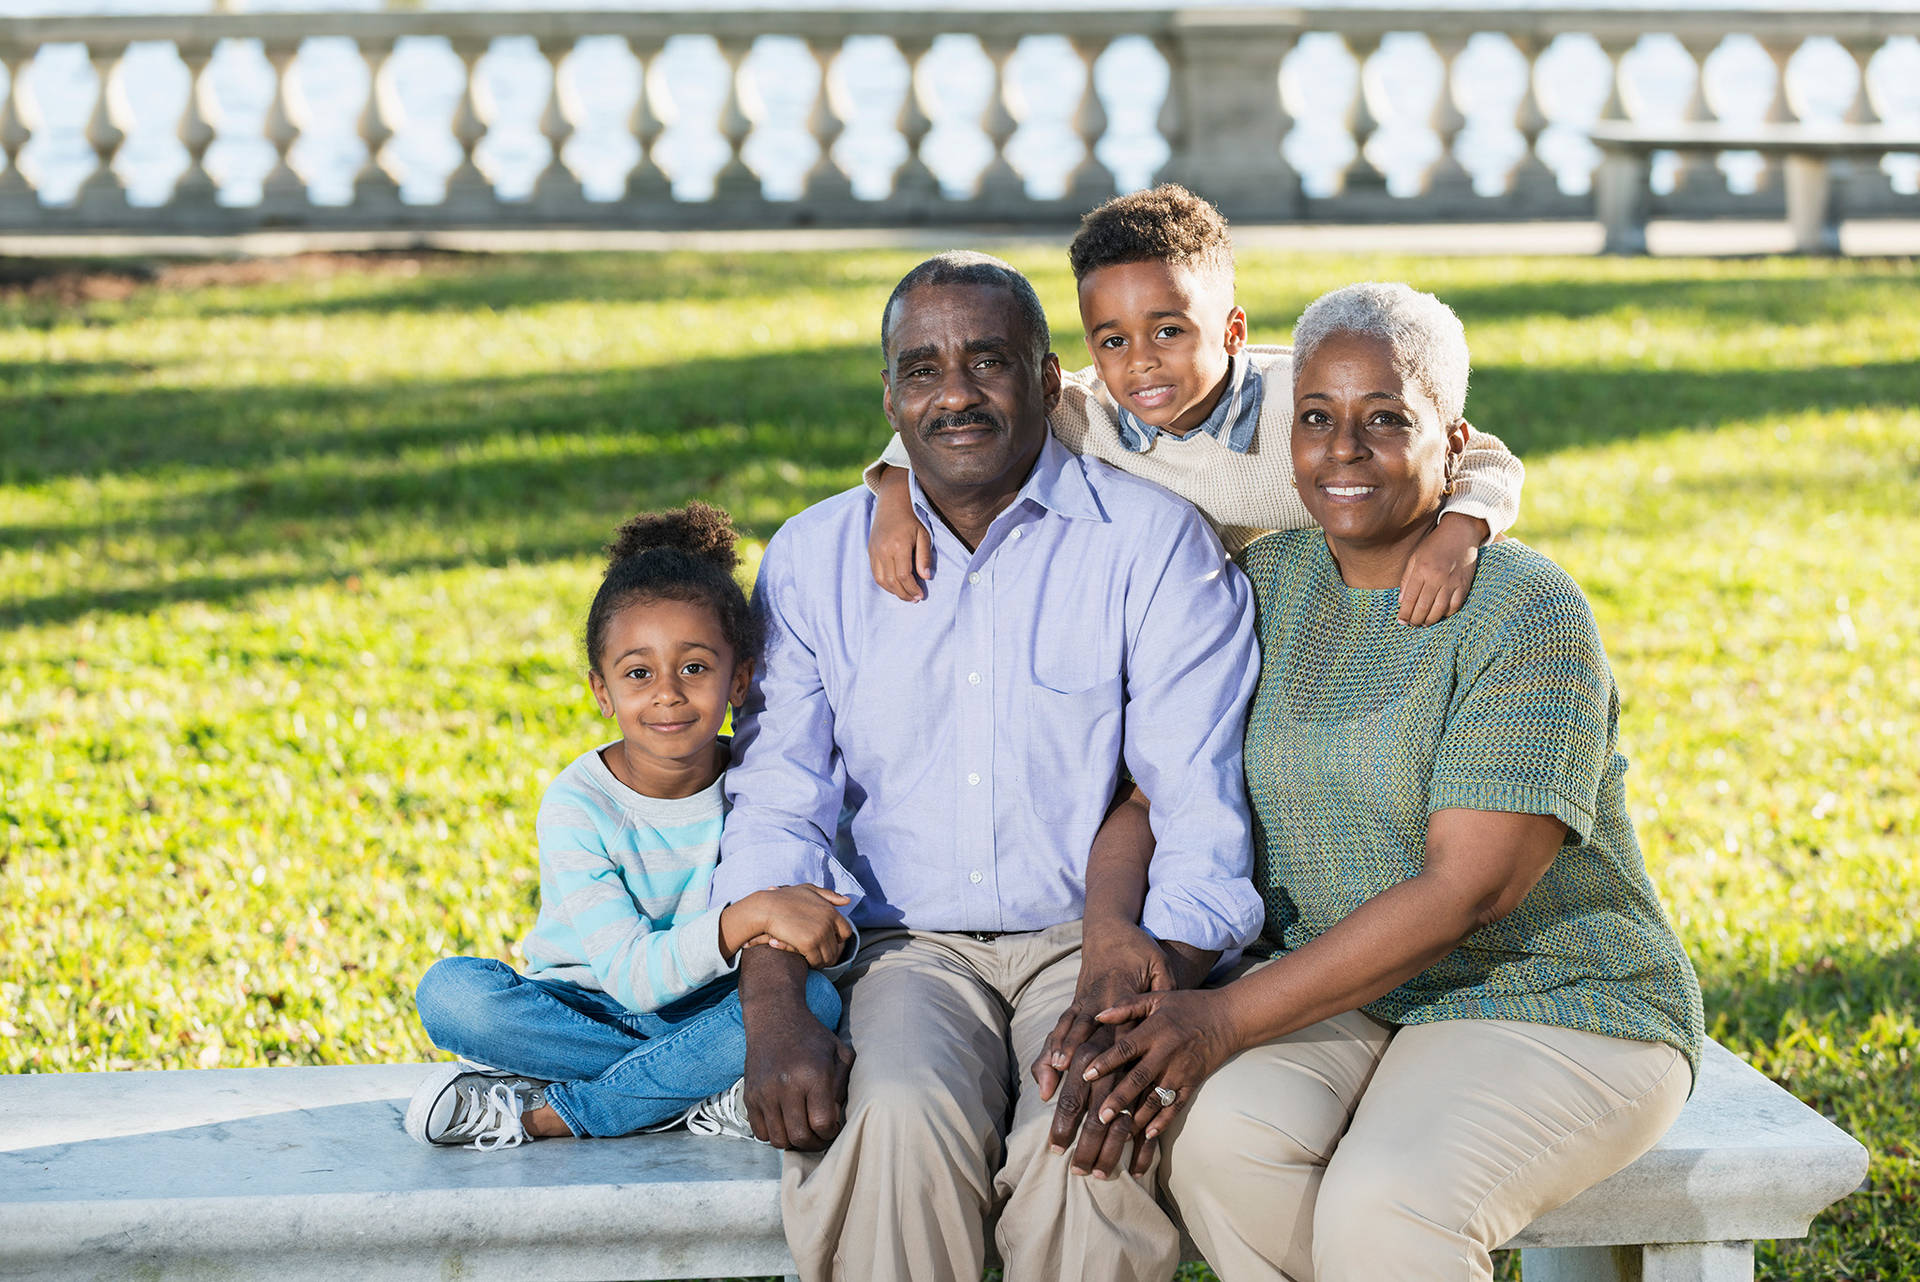 African-American grandparents with young grandson and granddaughter sitting on bench